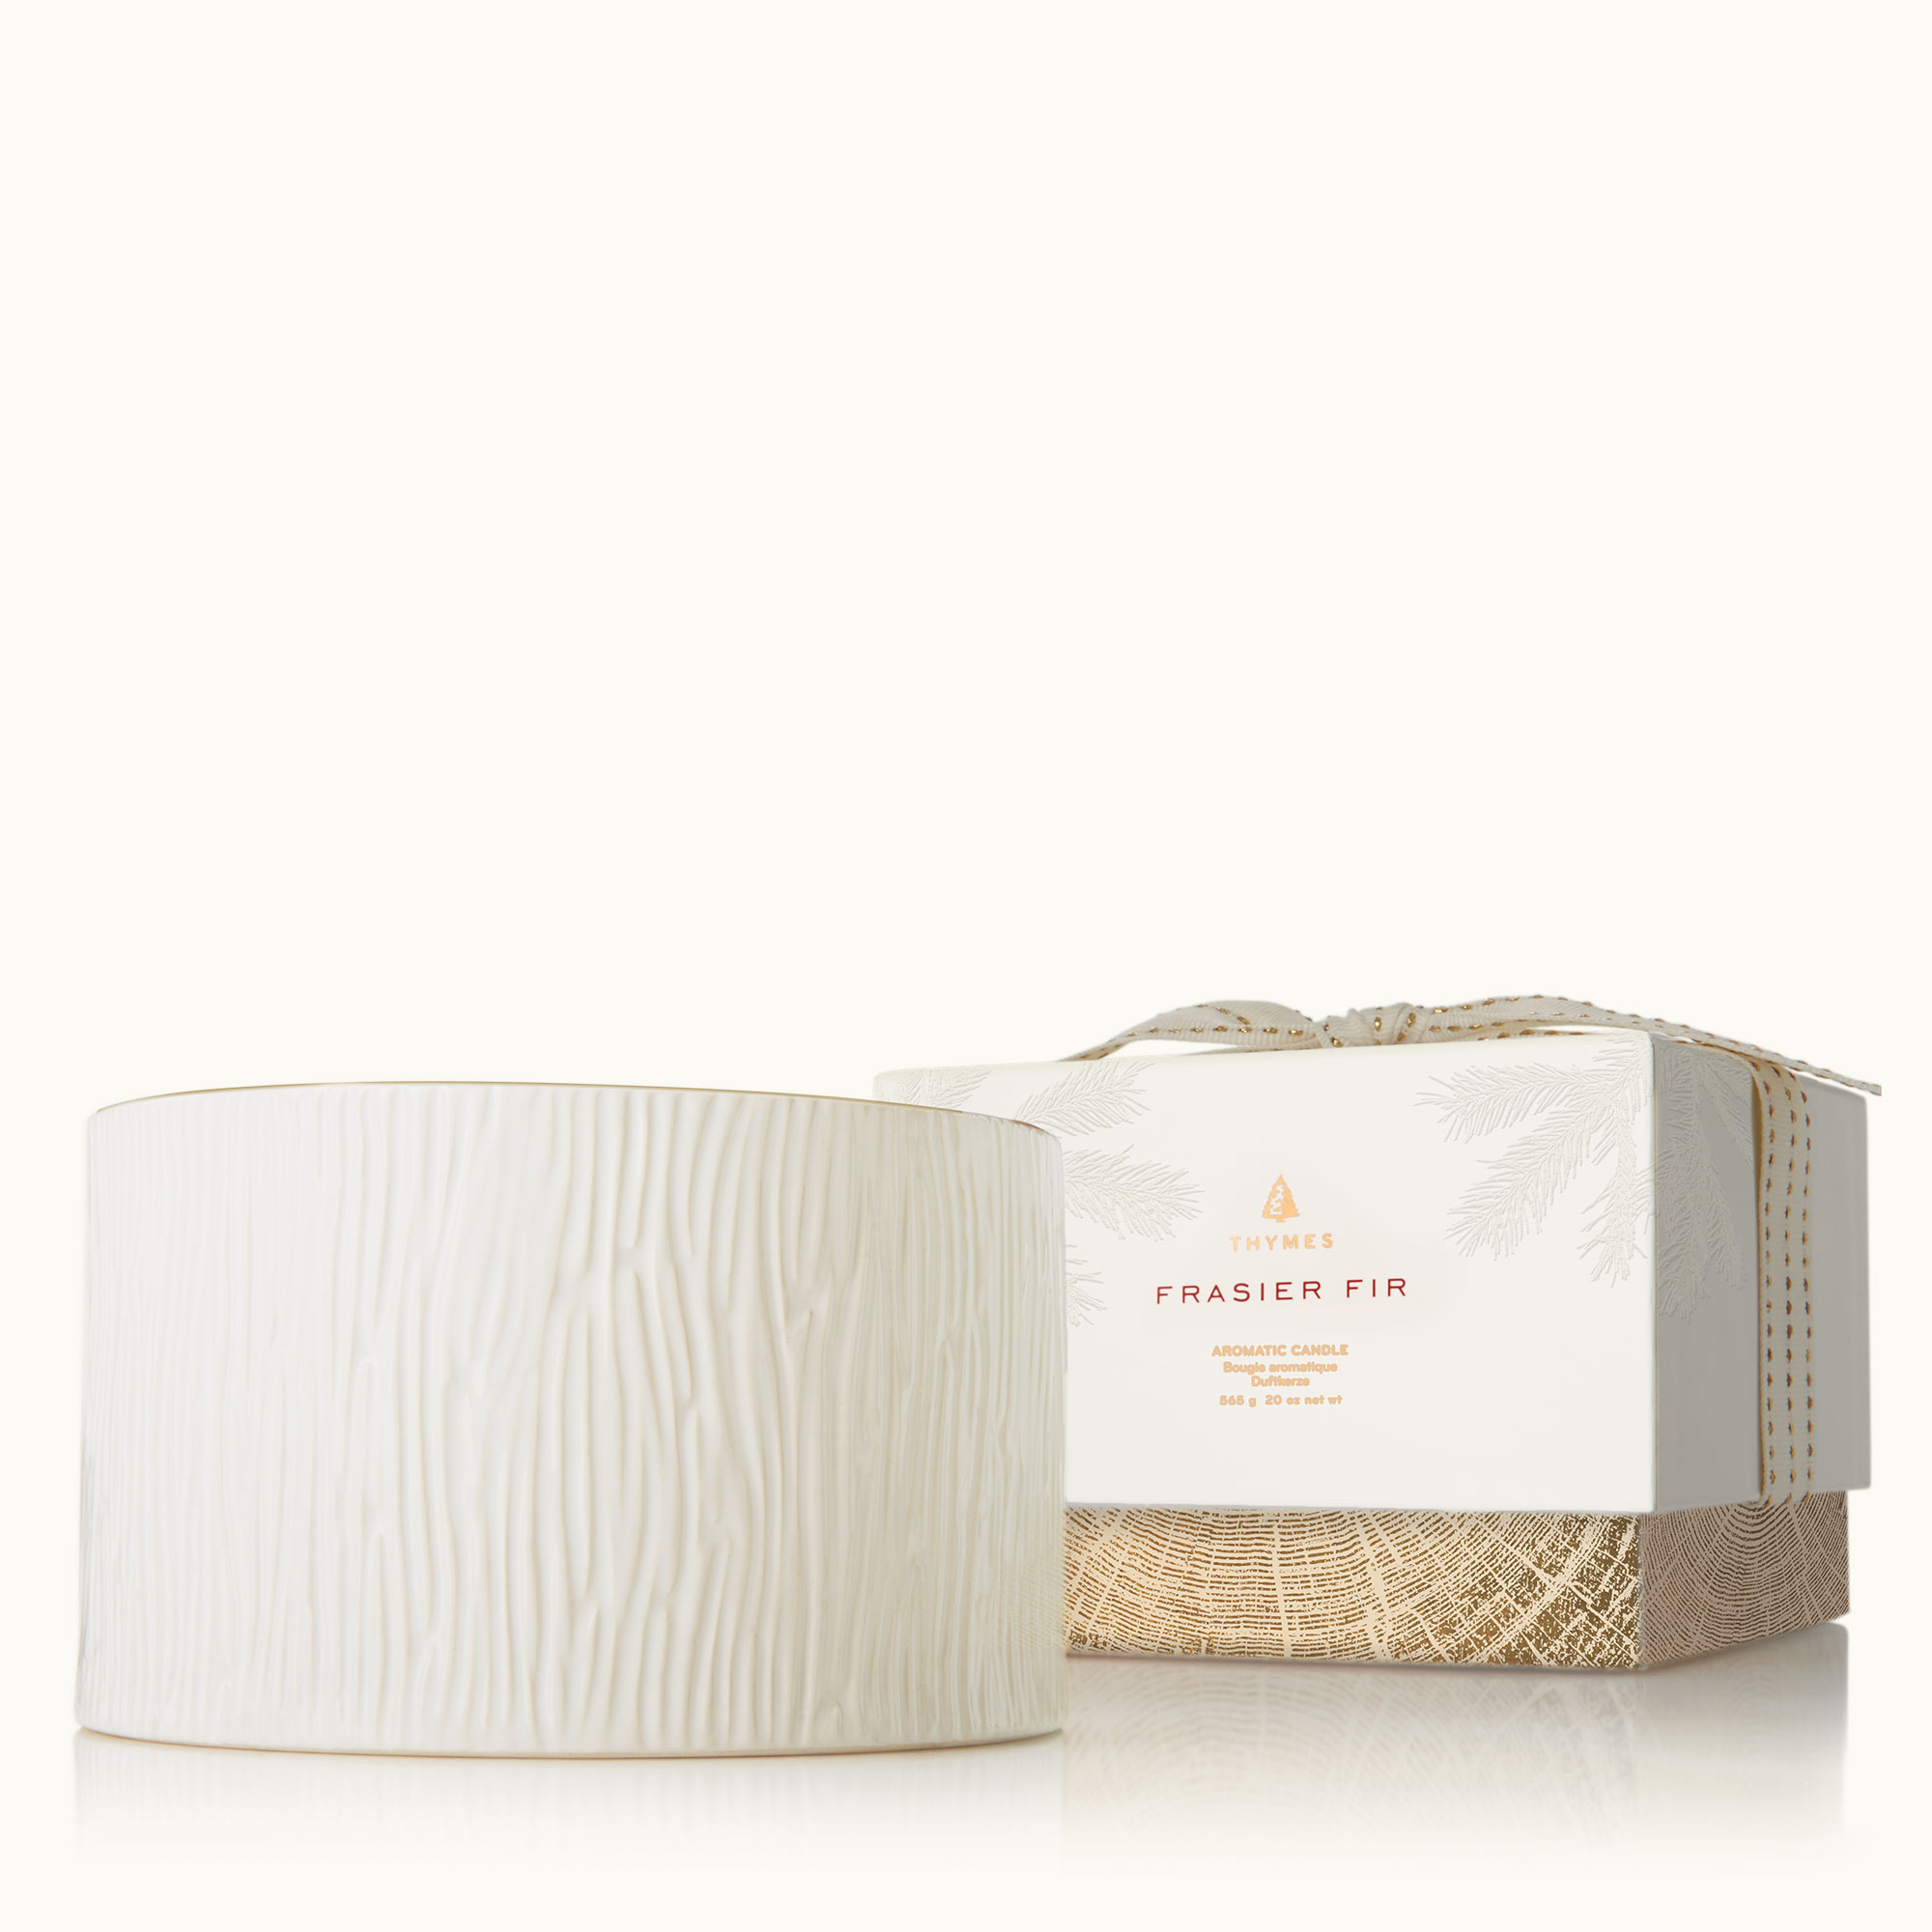  Thymes 3 Wick Candle - Sienna Sage Scented Candle for a Warm  Home Fragrance - White Candles Accented with a Gold Candle Lid - Textured Ceramic  Candle Jar (13.5 oz) : Health & Household